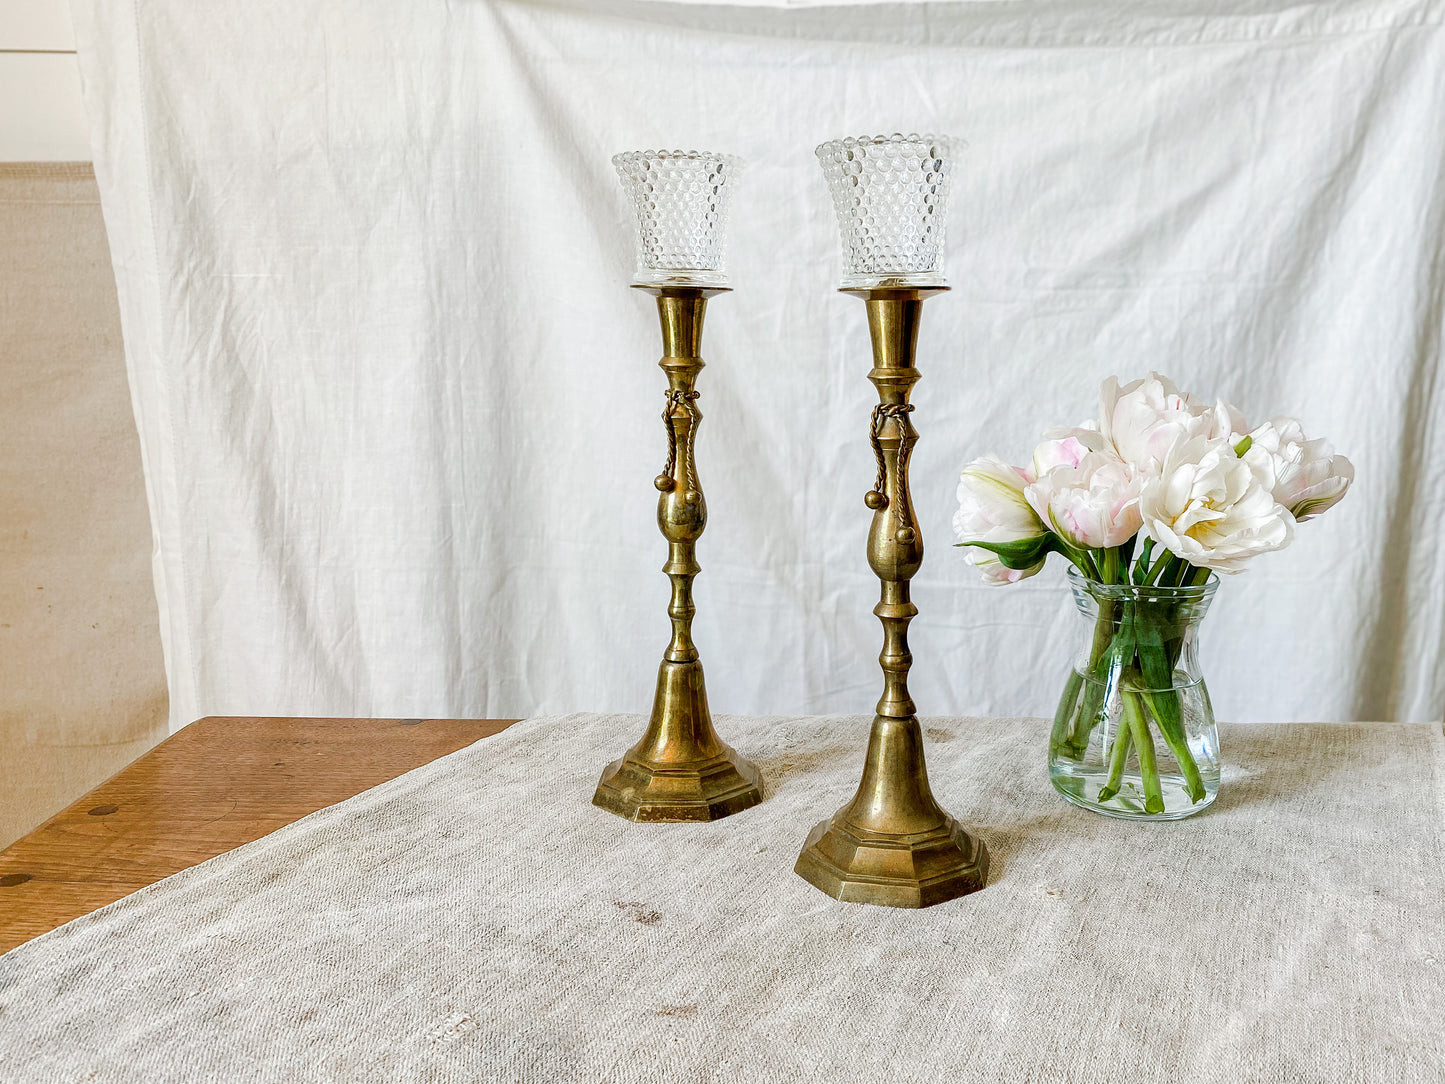 Vintage Pair of Brass Candle Holders with Rope Tassels and Clear Bubble Glass Votive Cups